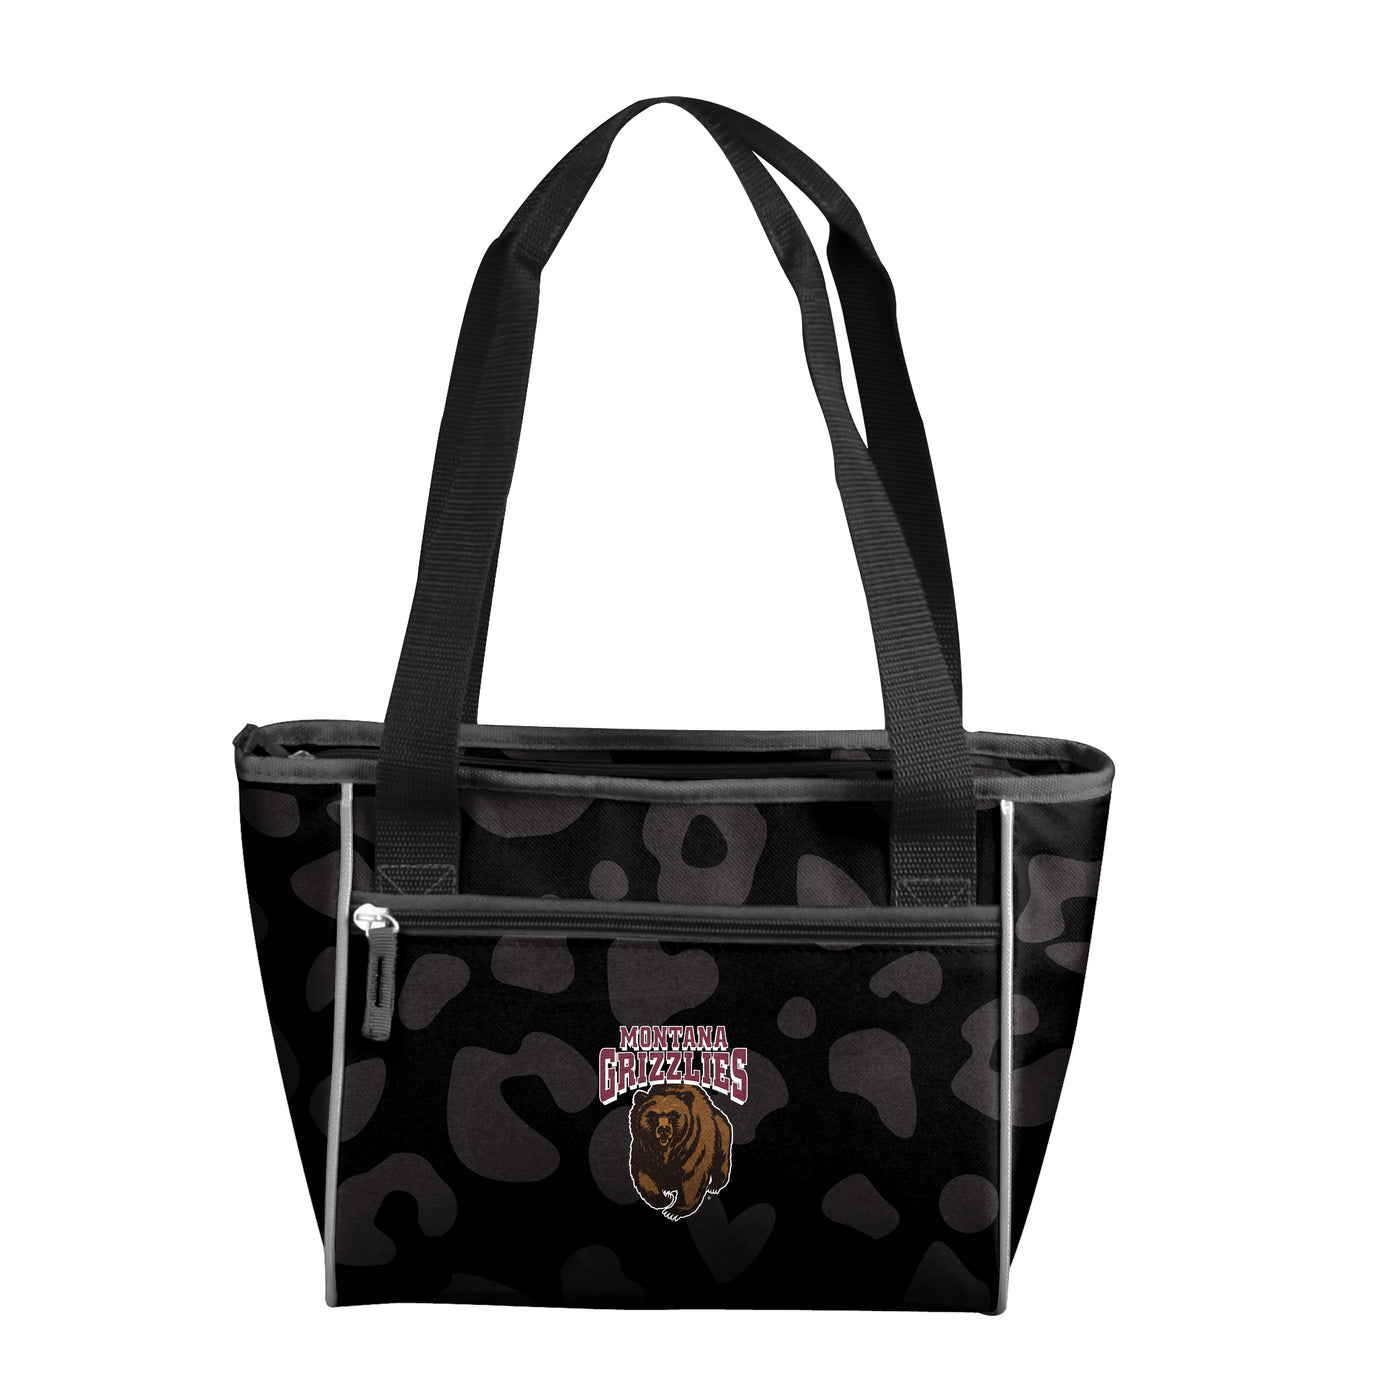 Montana Leopard Print 16 Can Cooler Tote